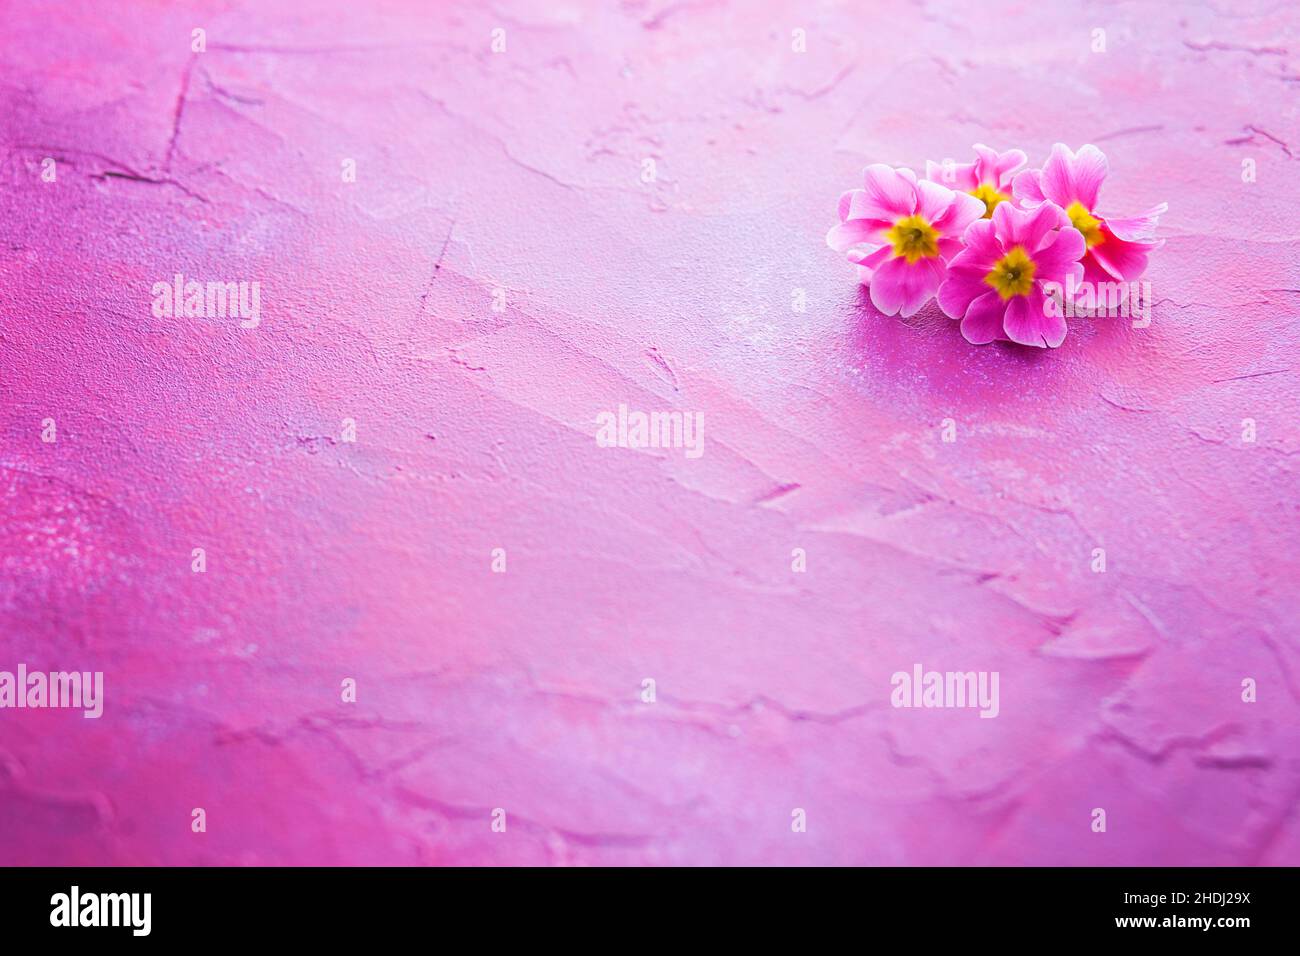 blossom, pink, blossoms, pinks Stock Photo